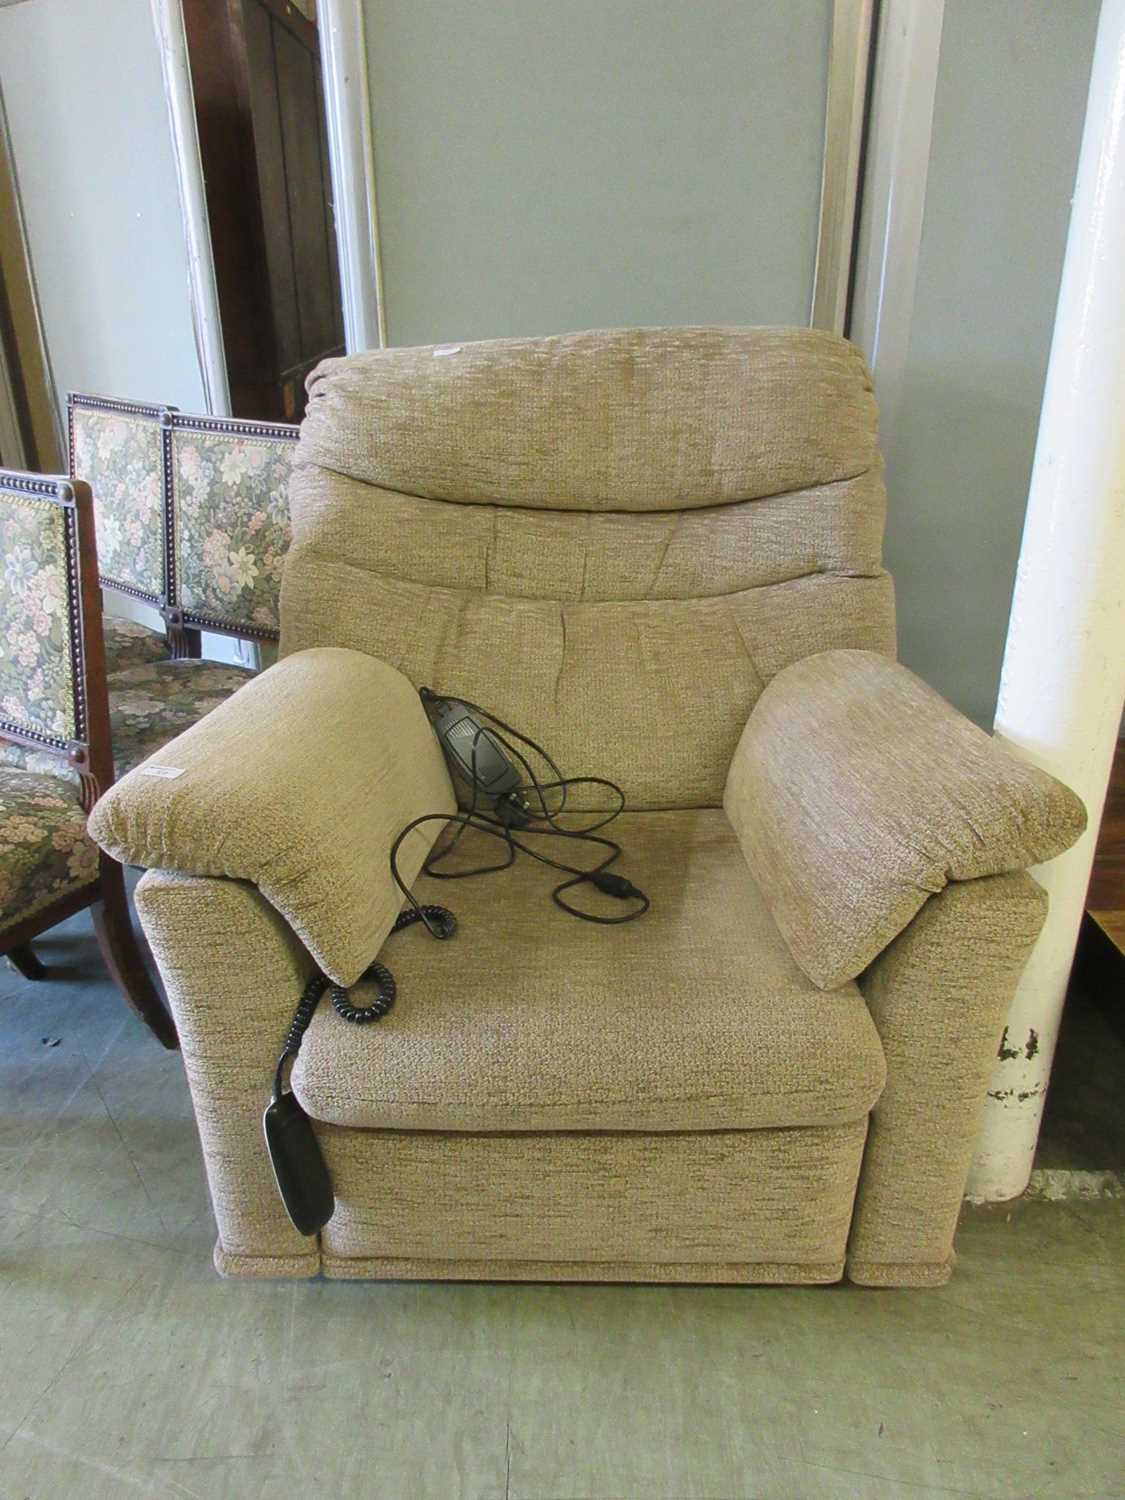 An electric rise and recline chair upholstered in a cut brown fabric